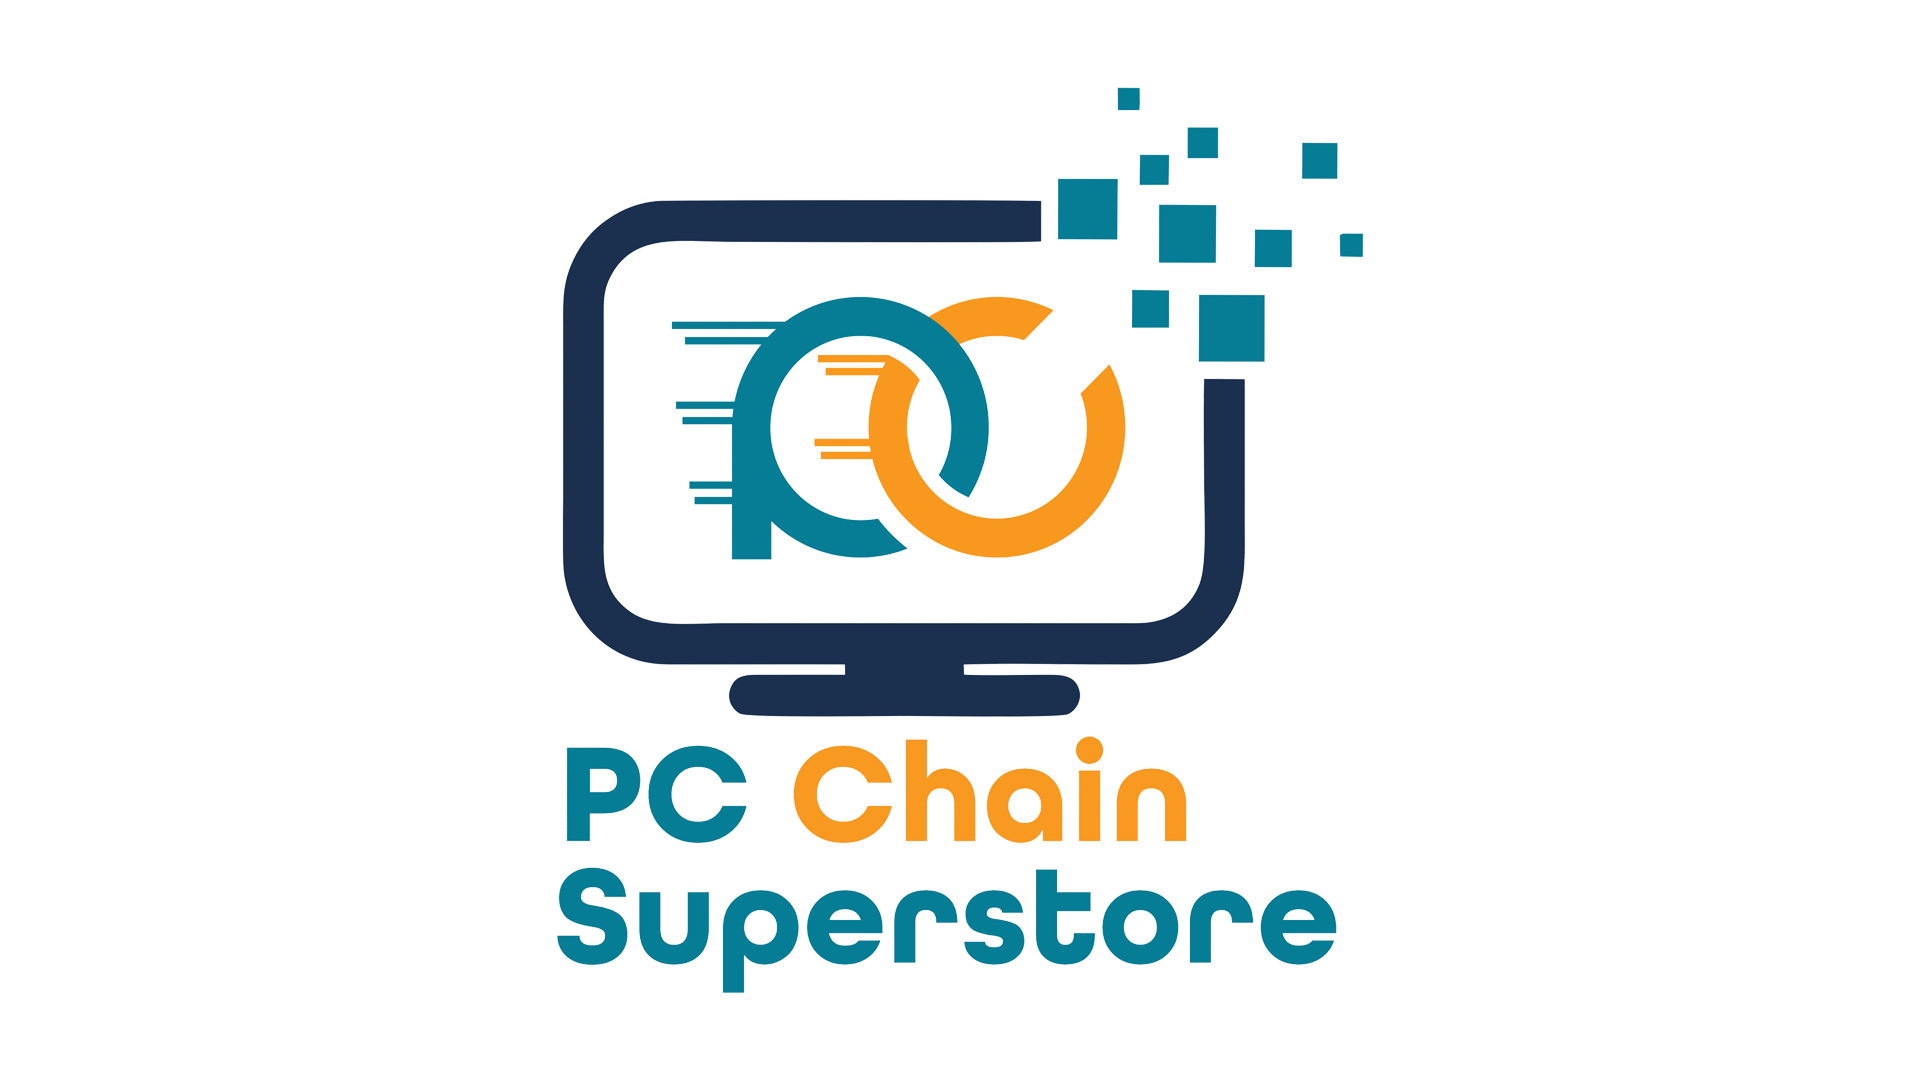 PC Chain Superstore